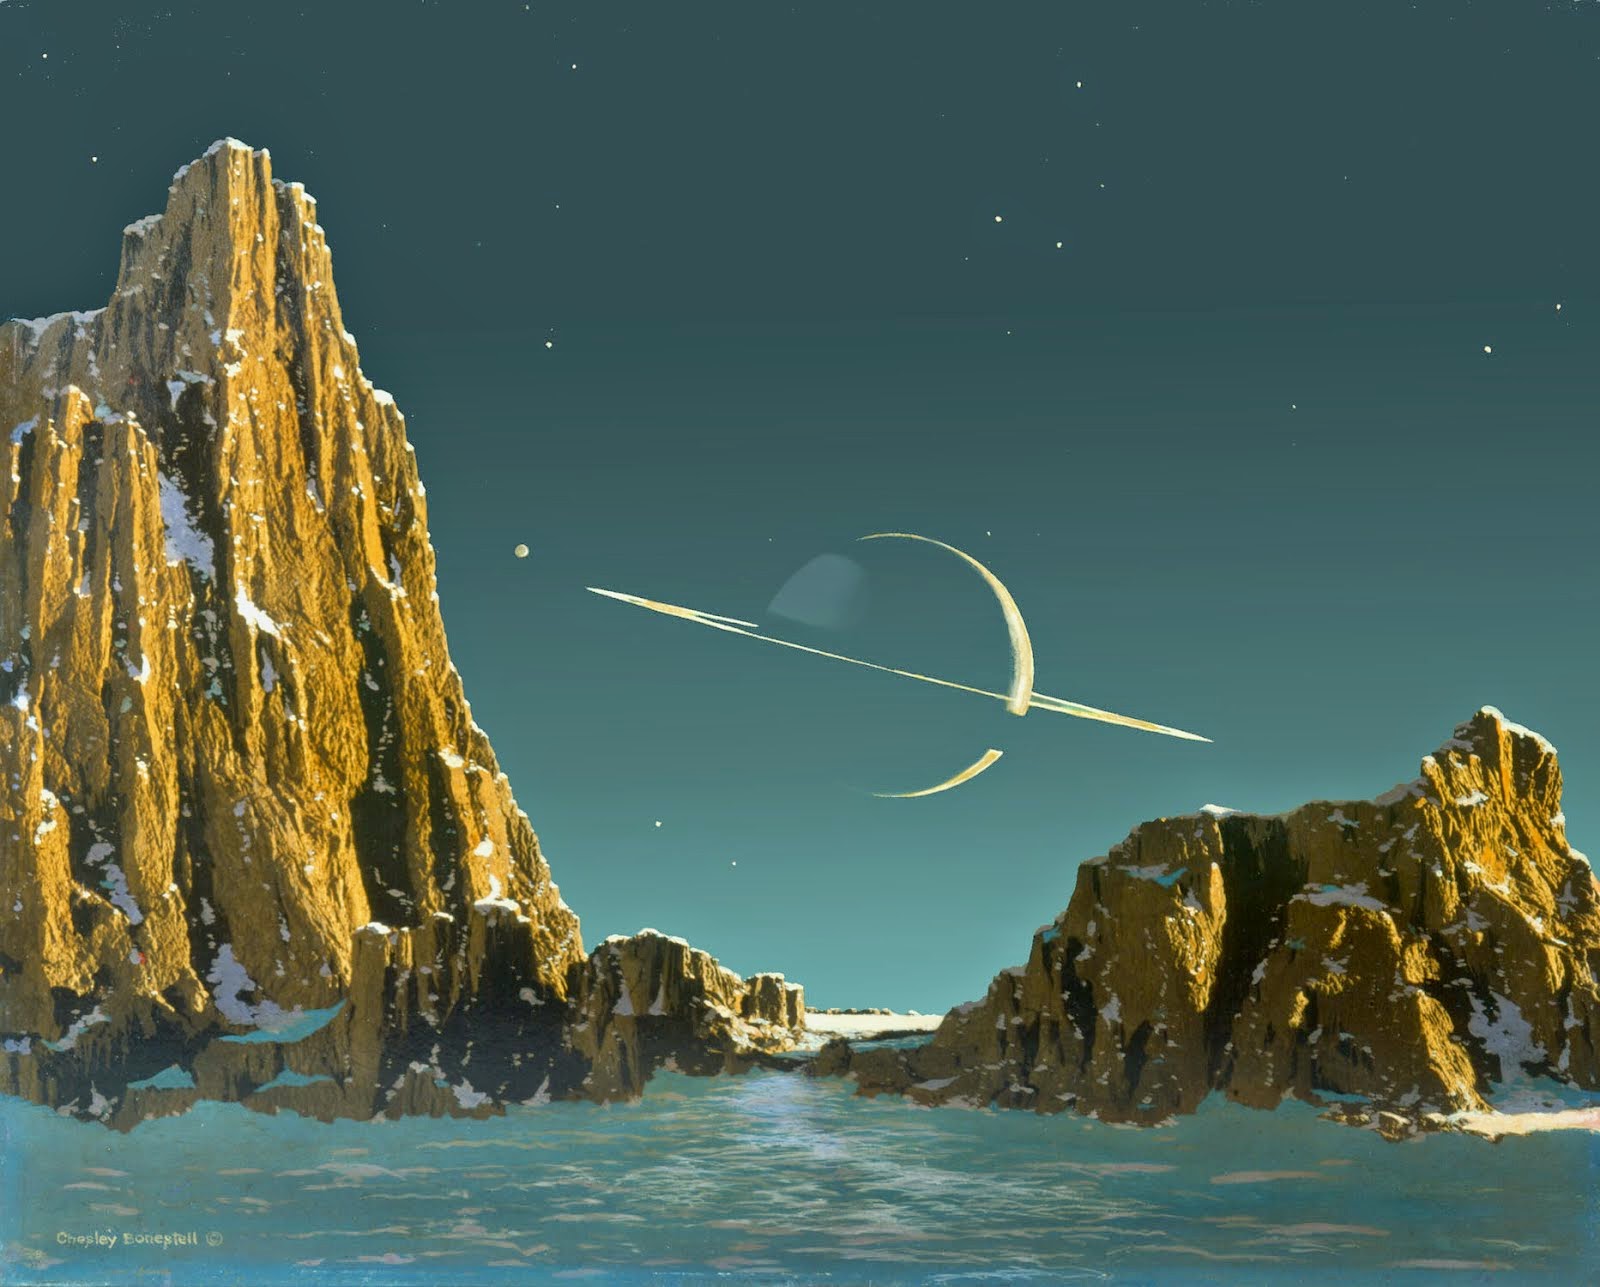 Saturn as seen from Titan, painting by Chesley Bonestell